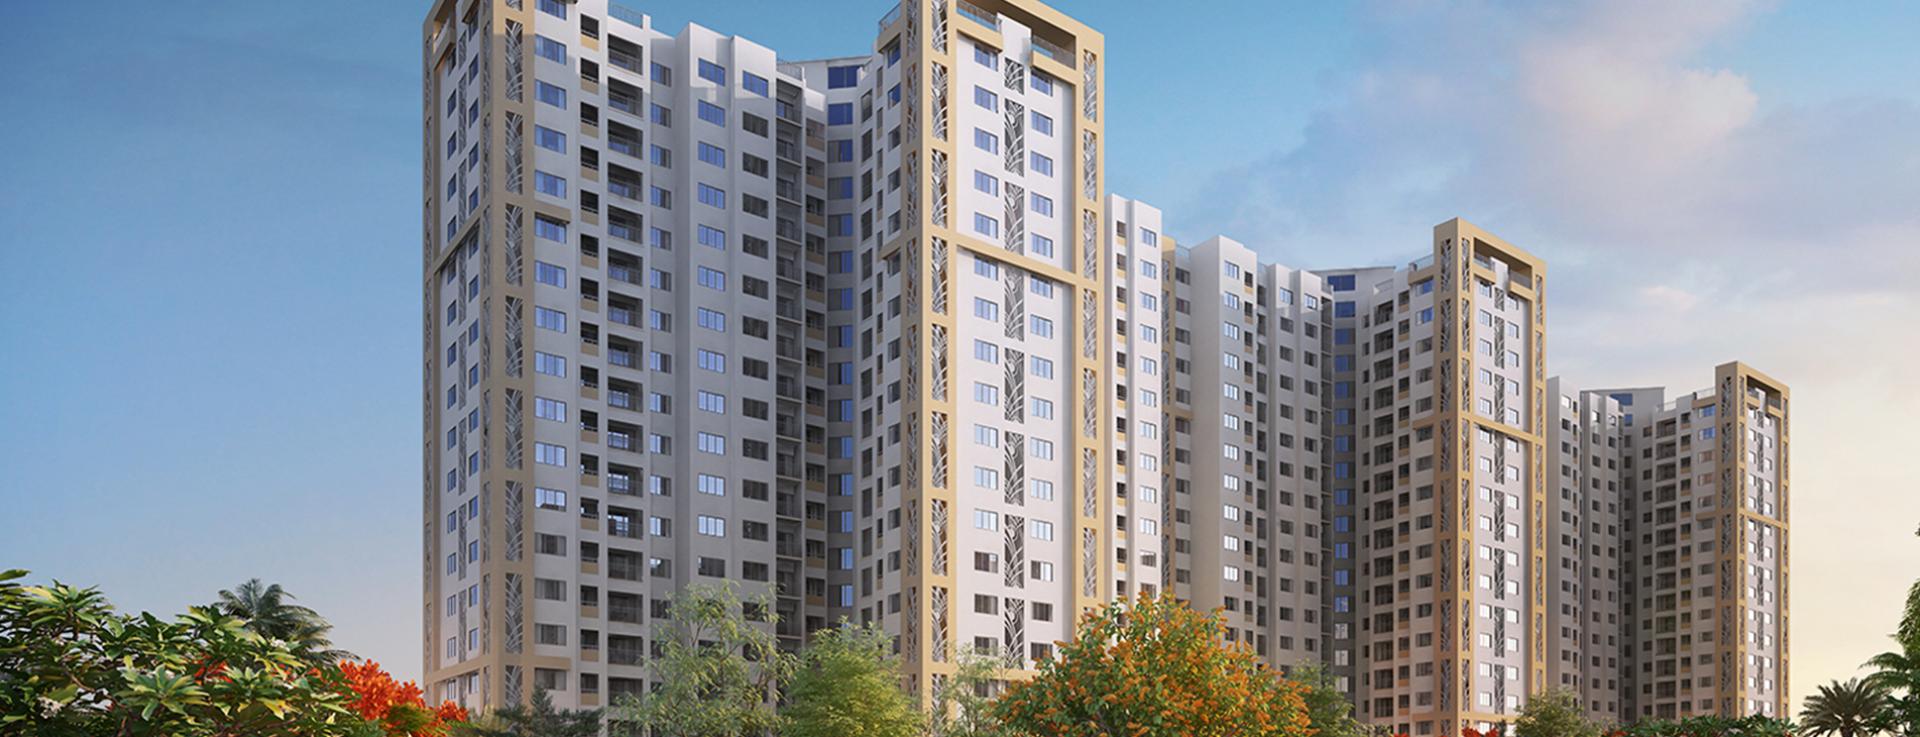 At Shriram Greenfield each residential unit is designed by international experts & engineered with excellence